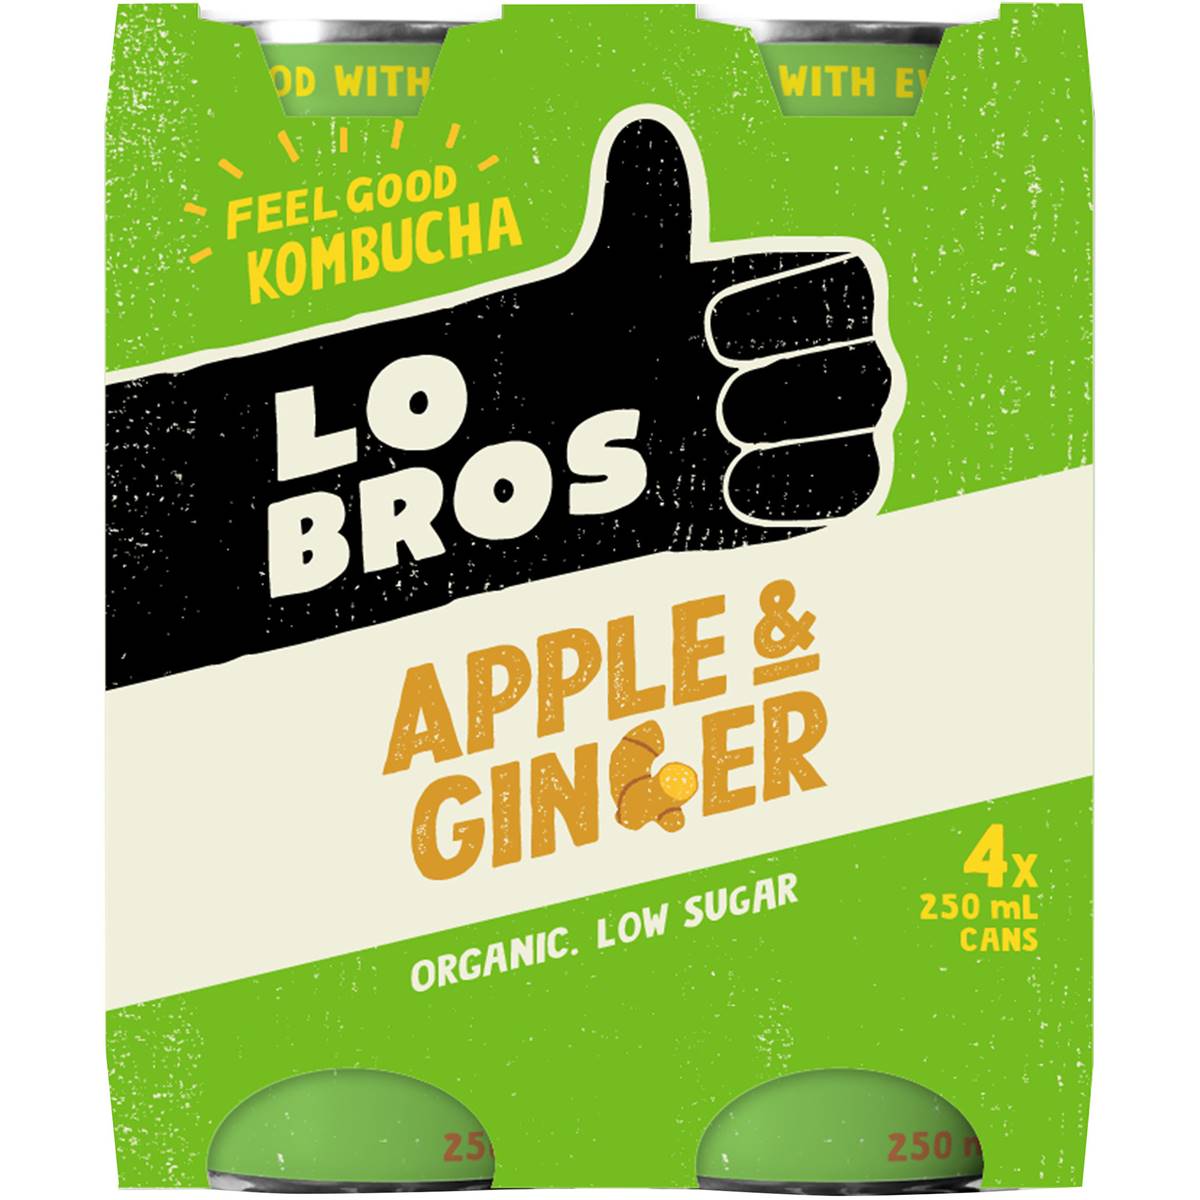 Calories in Lo Bros Kombucha Apple & Ginger Cans